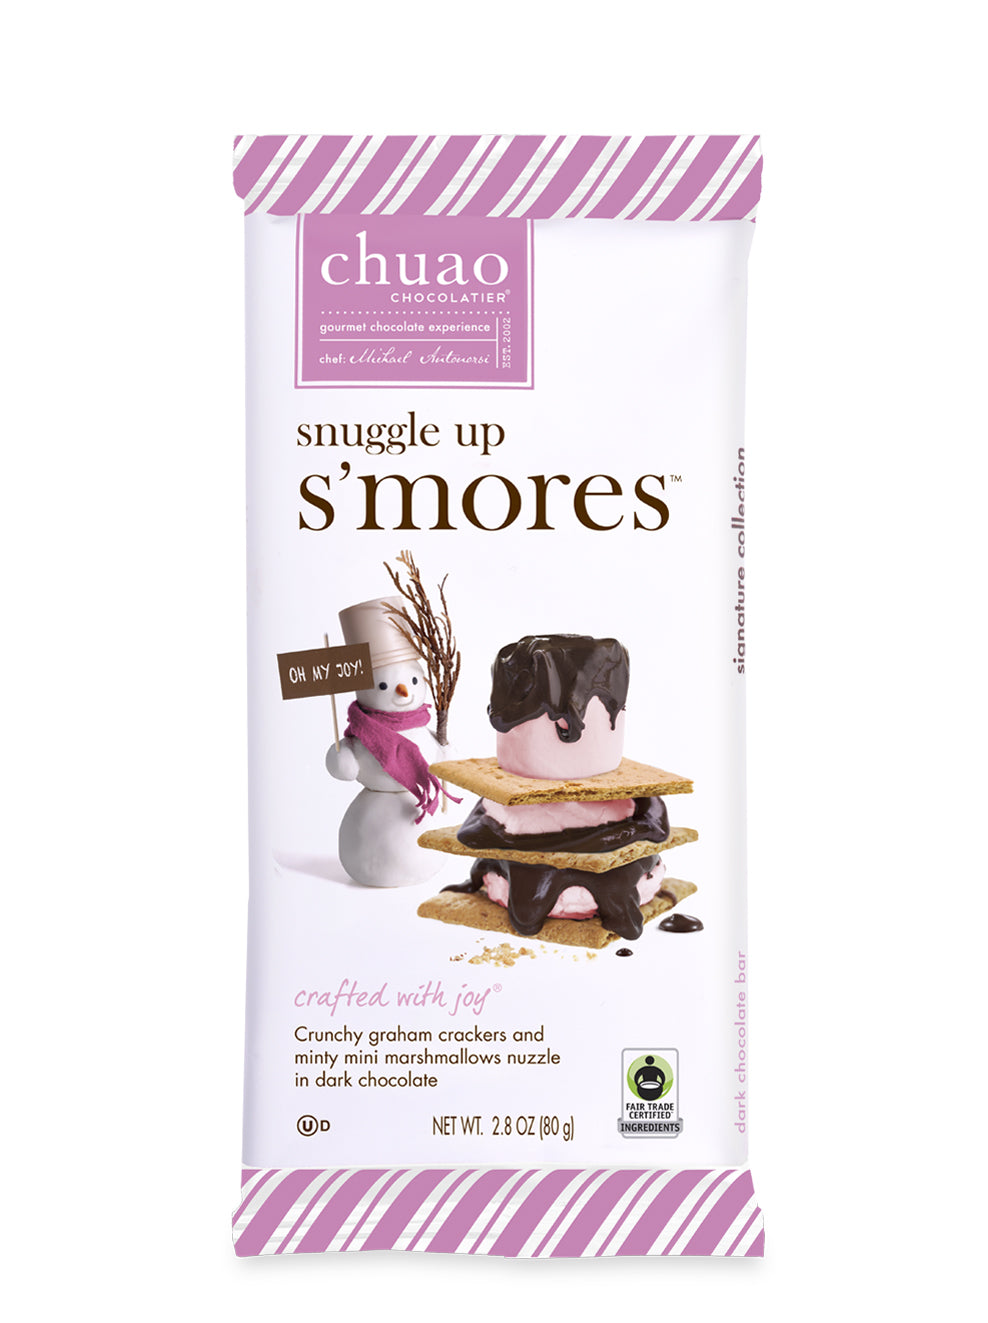 Snuggle Up S'mores Chocolate Bar